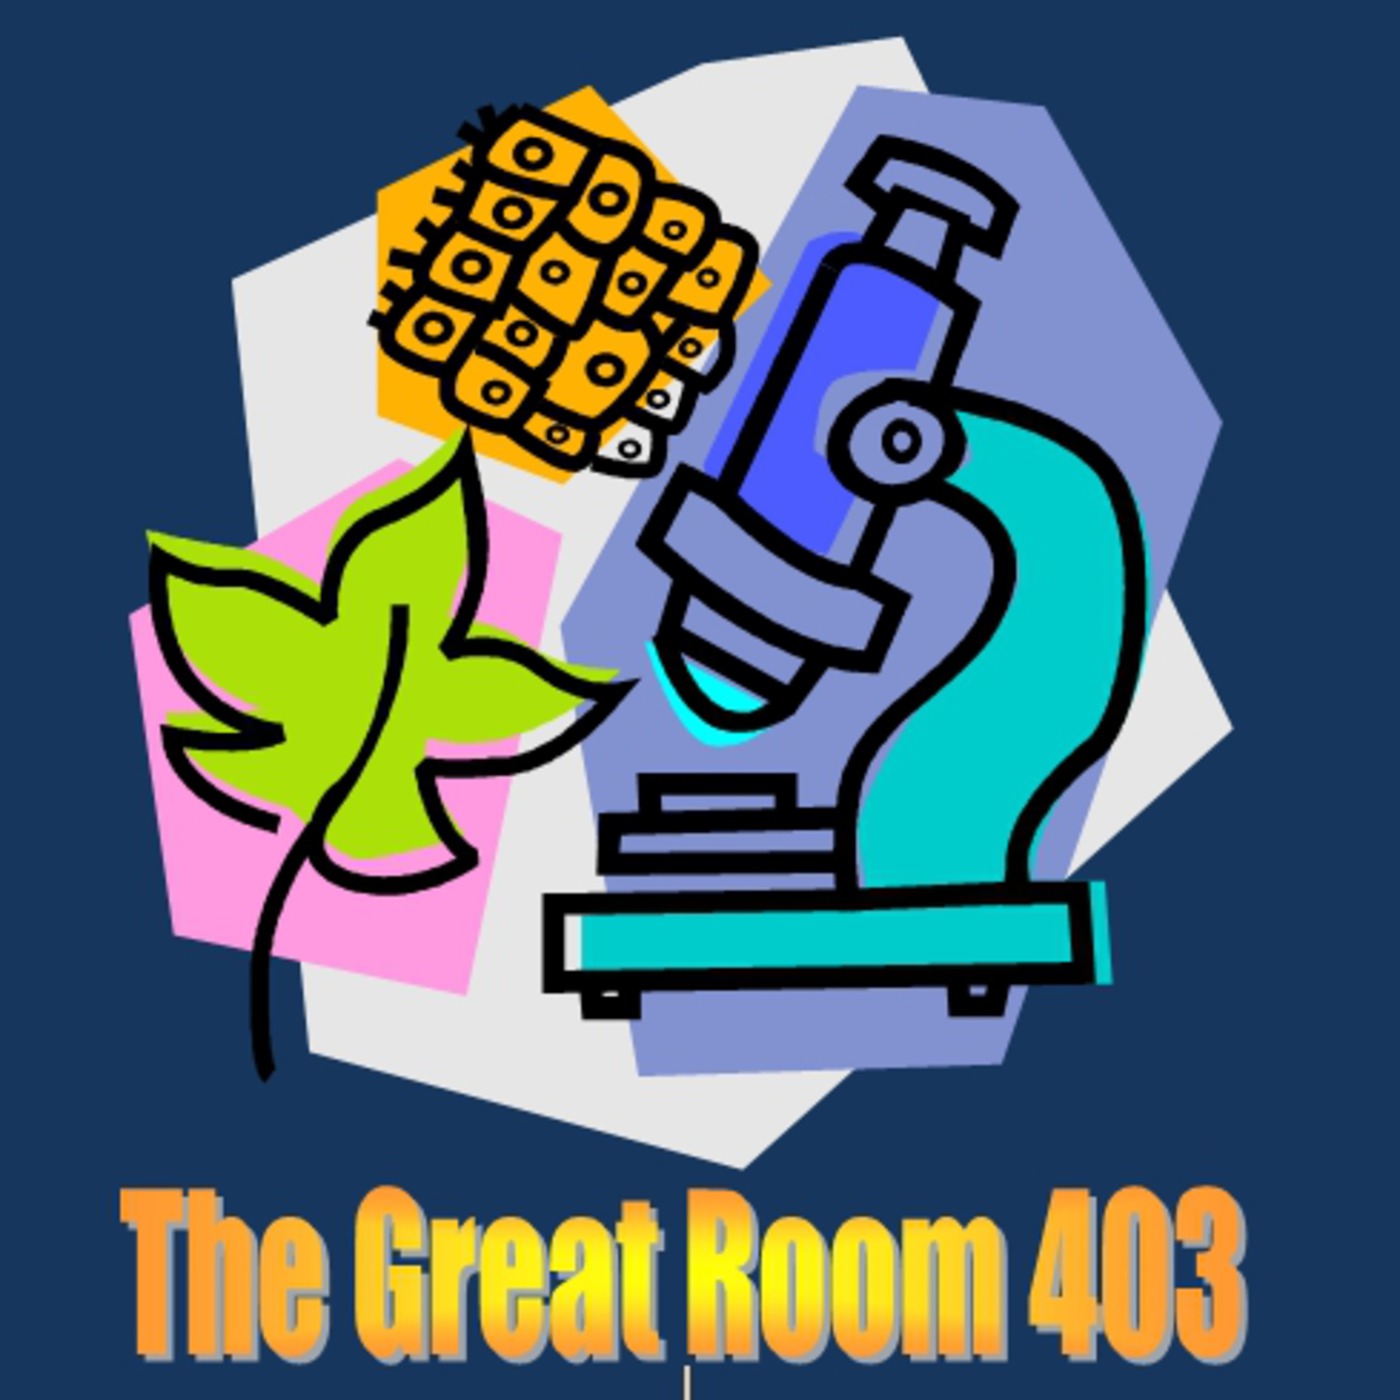 The Great Room 403: Cells